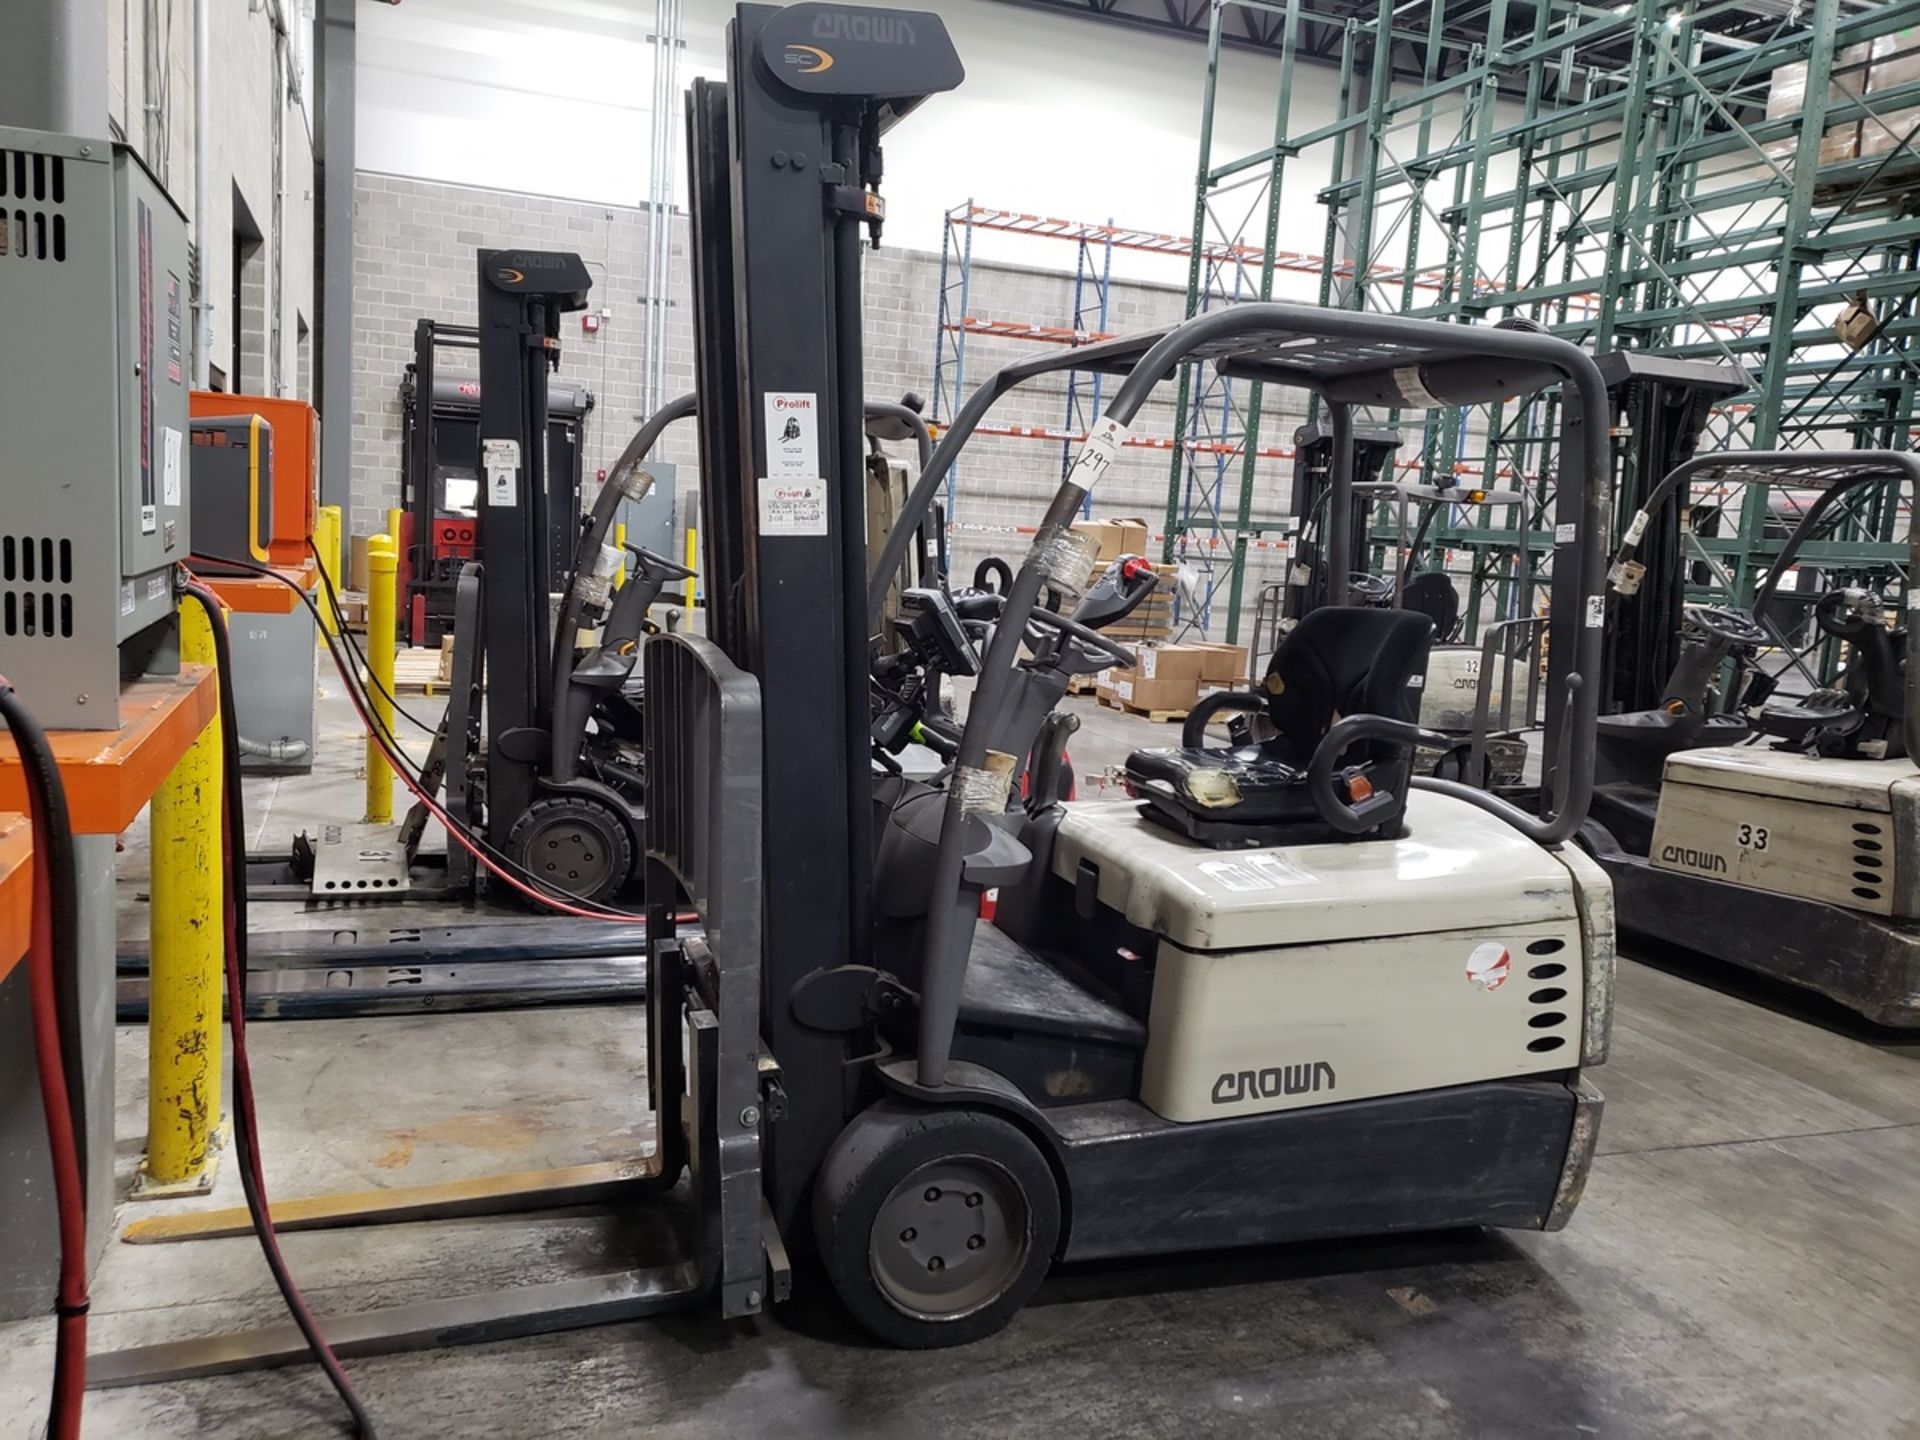 2004 Crown Forklift Model 4000 Series Electric Lift Truck, S/N 9A134698 | Rig Fee: $150